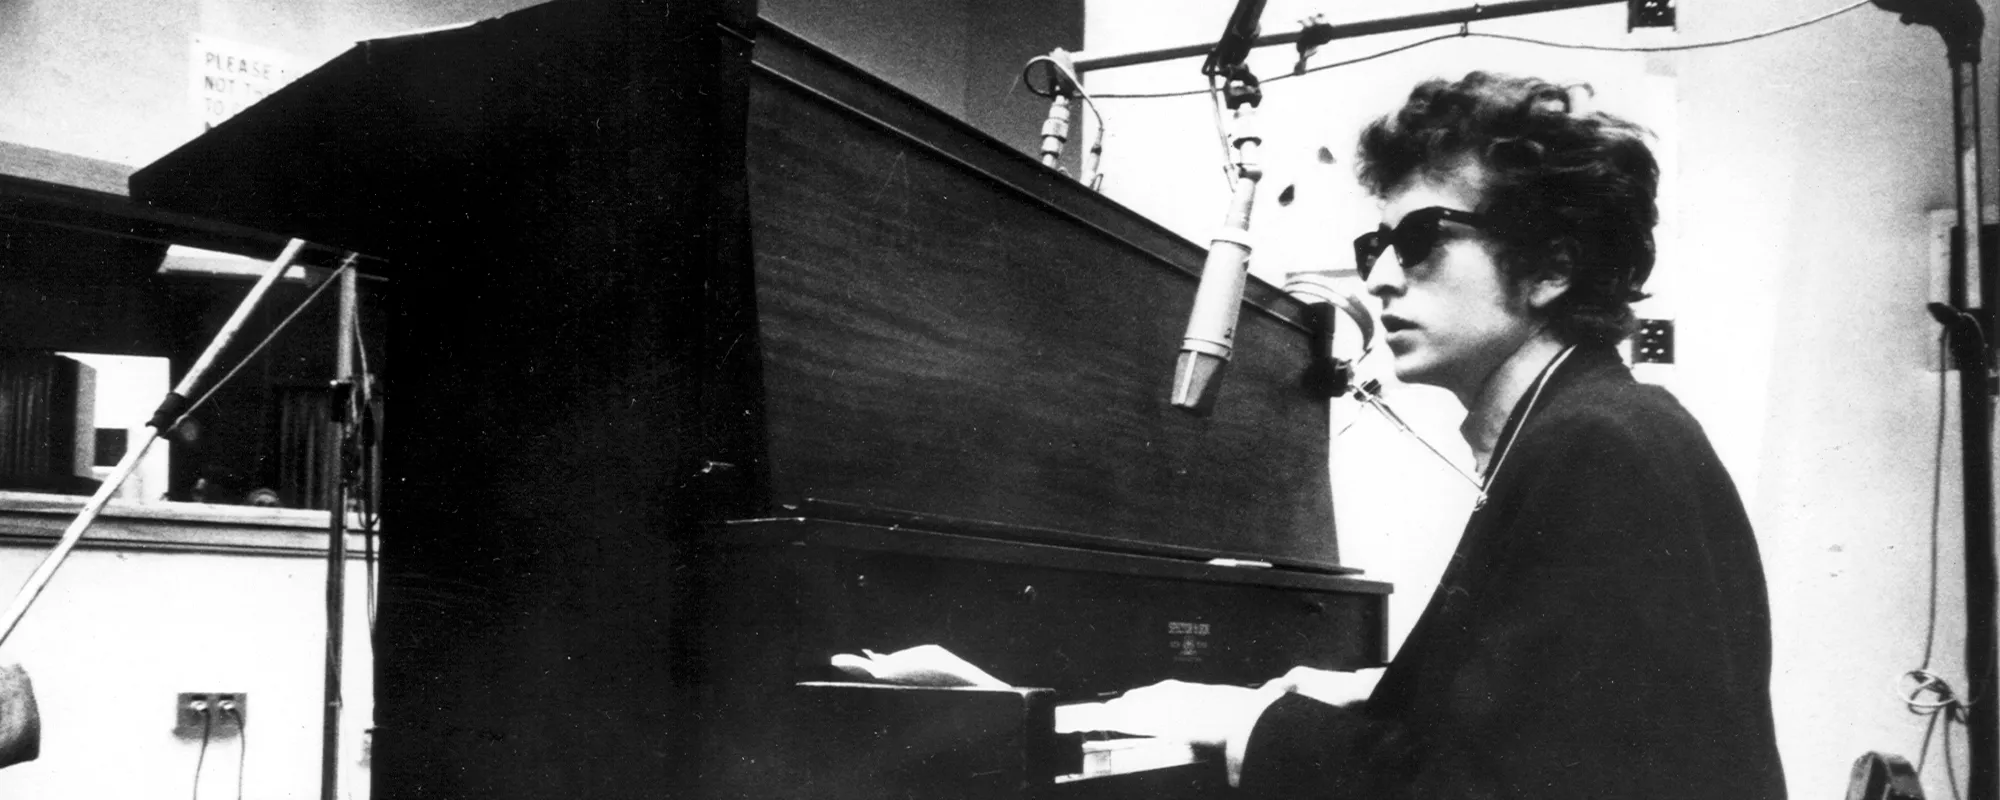 The Story Behind “I Want You” by Bob Dylan and the Rock Hall of Famer Who Urged Him to Record It